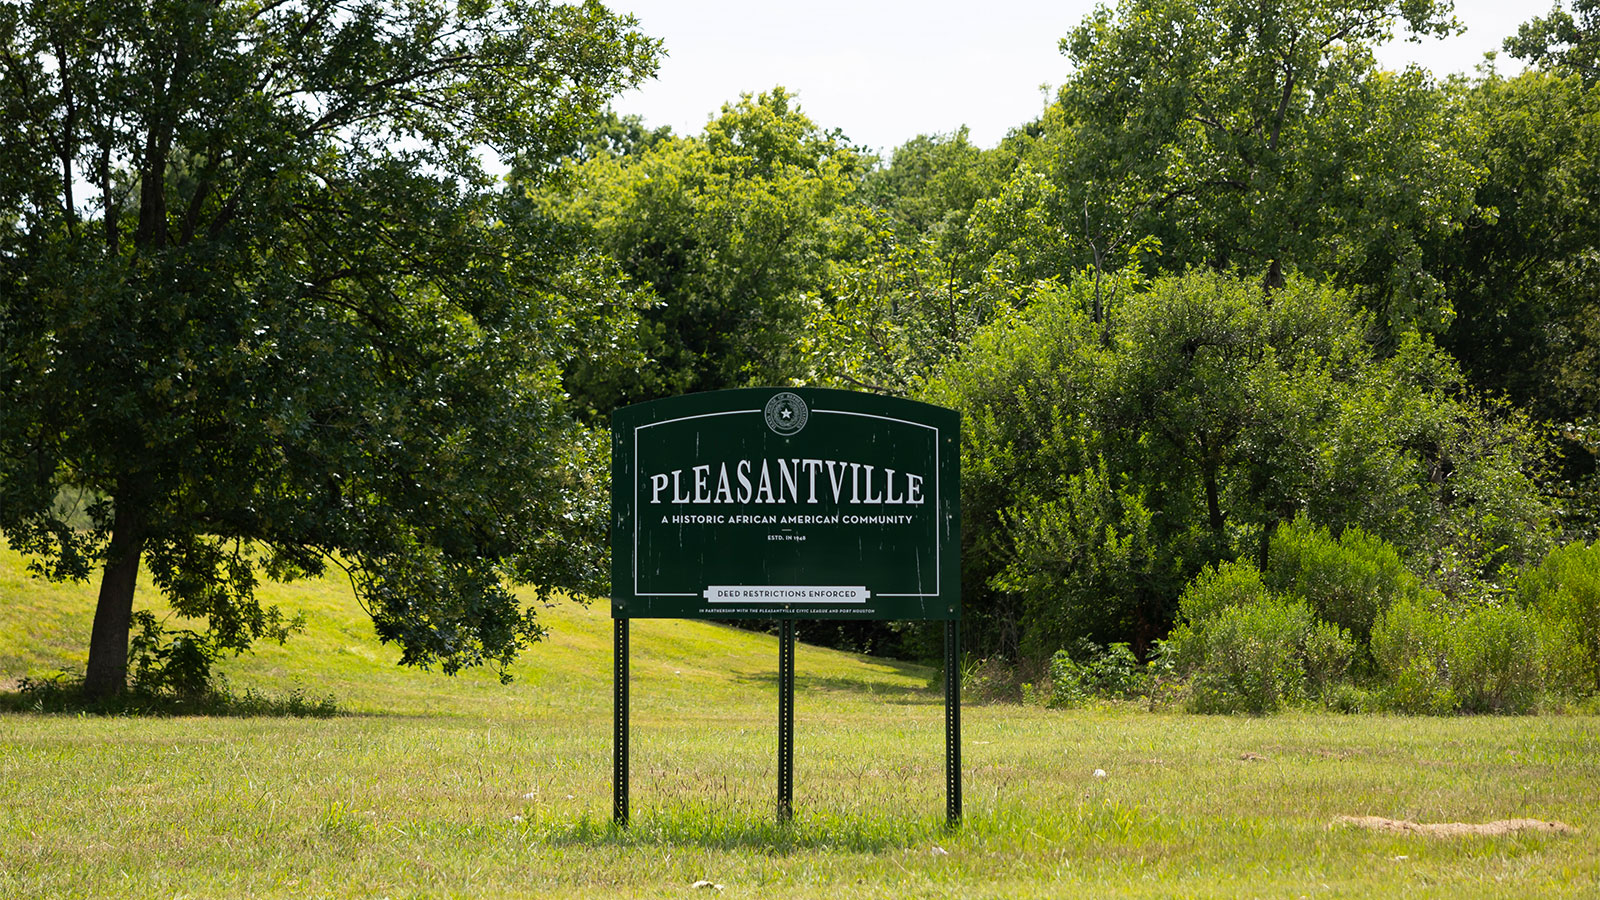 a sign reading "Pleasantville, a historic african-american community" in a grassy field with trees in the background